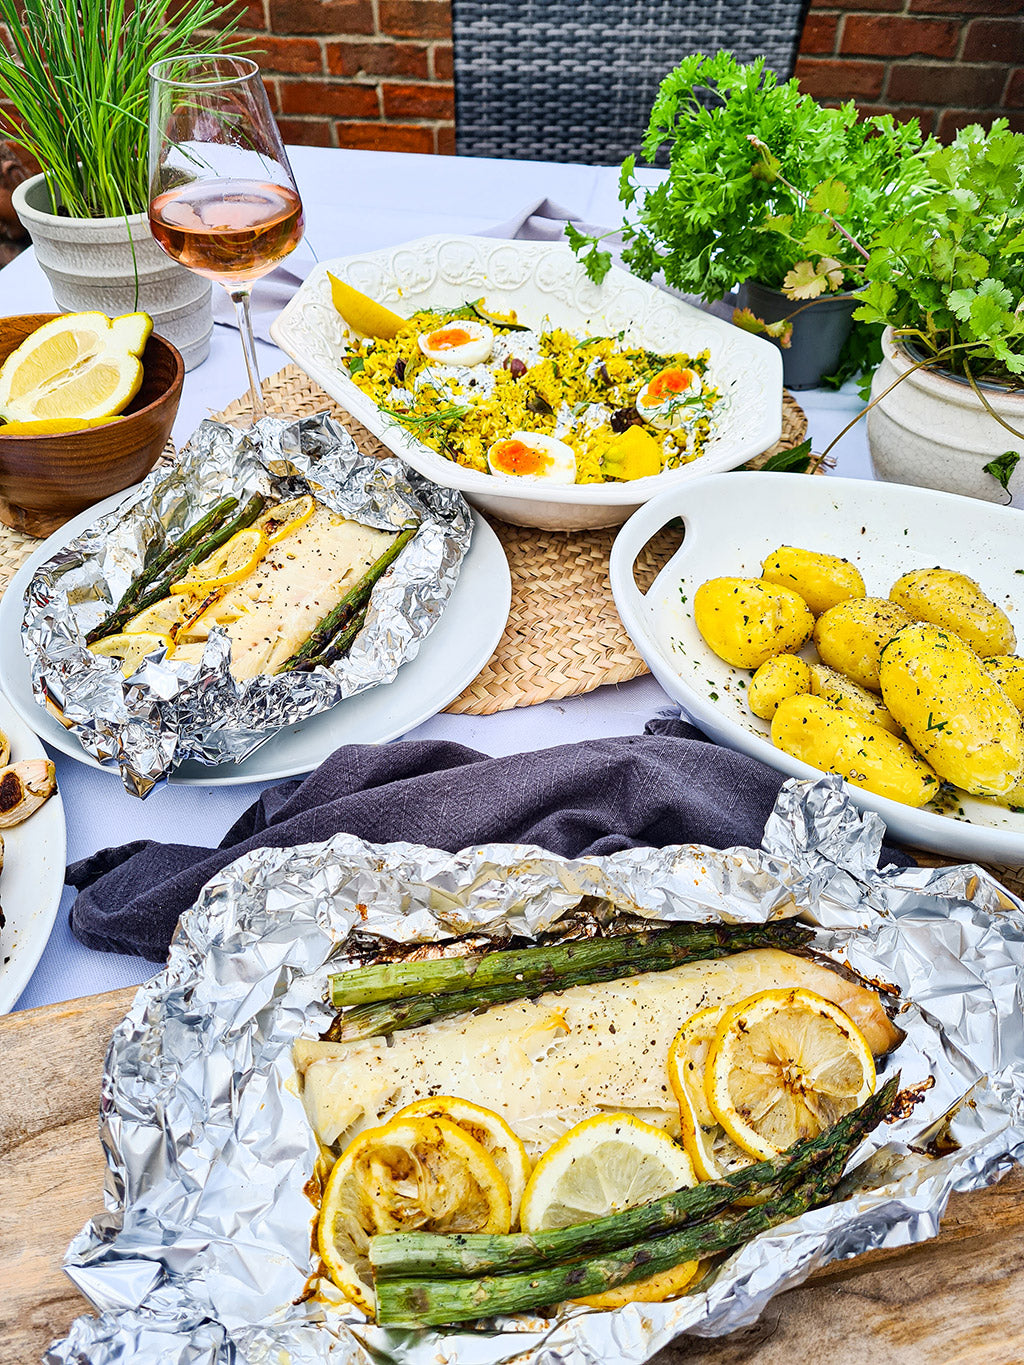 Smoked Haddock BBQ with Charred Vegetables